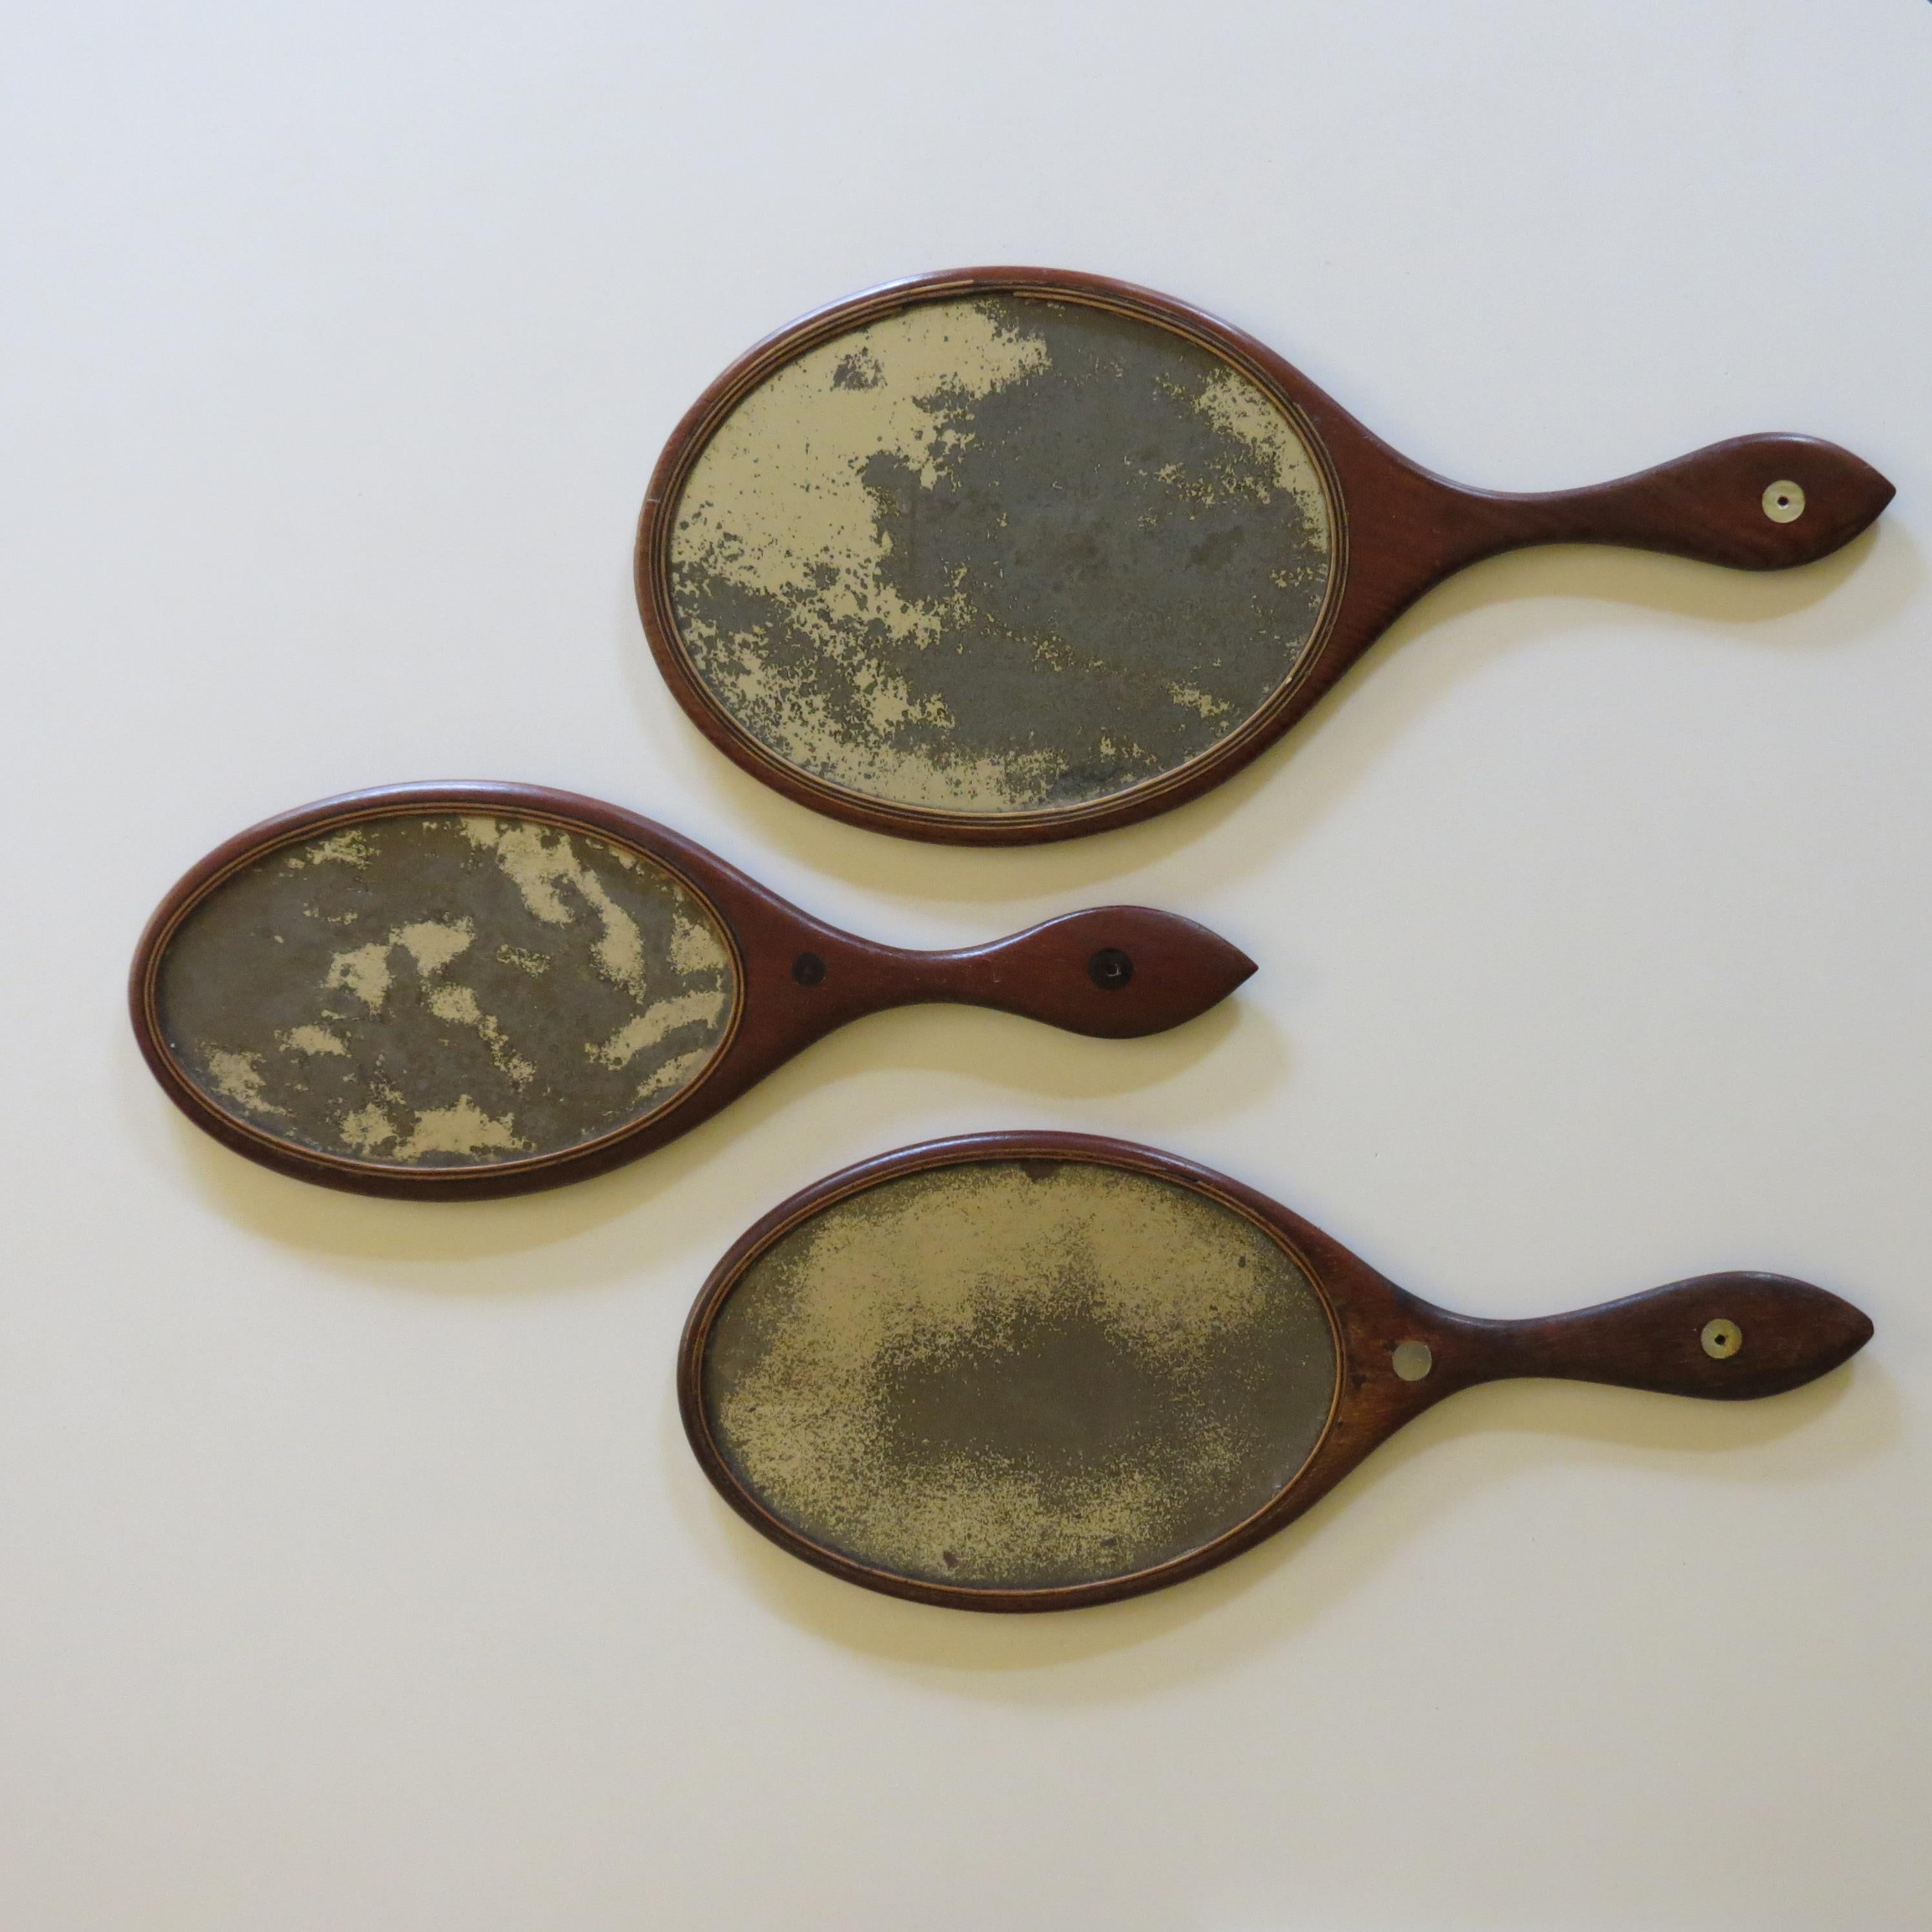 Wonderful set of elegant hand held mirrors. The frames are made from Mahogany with lovely boxwood stringing around the edge of the glass plate mirrors, two of the mirrors have a very nice inlaid circular disc detail to the handle made from shell and